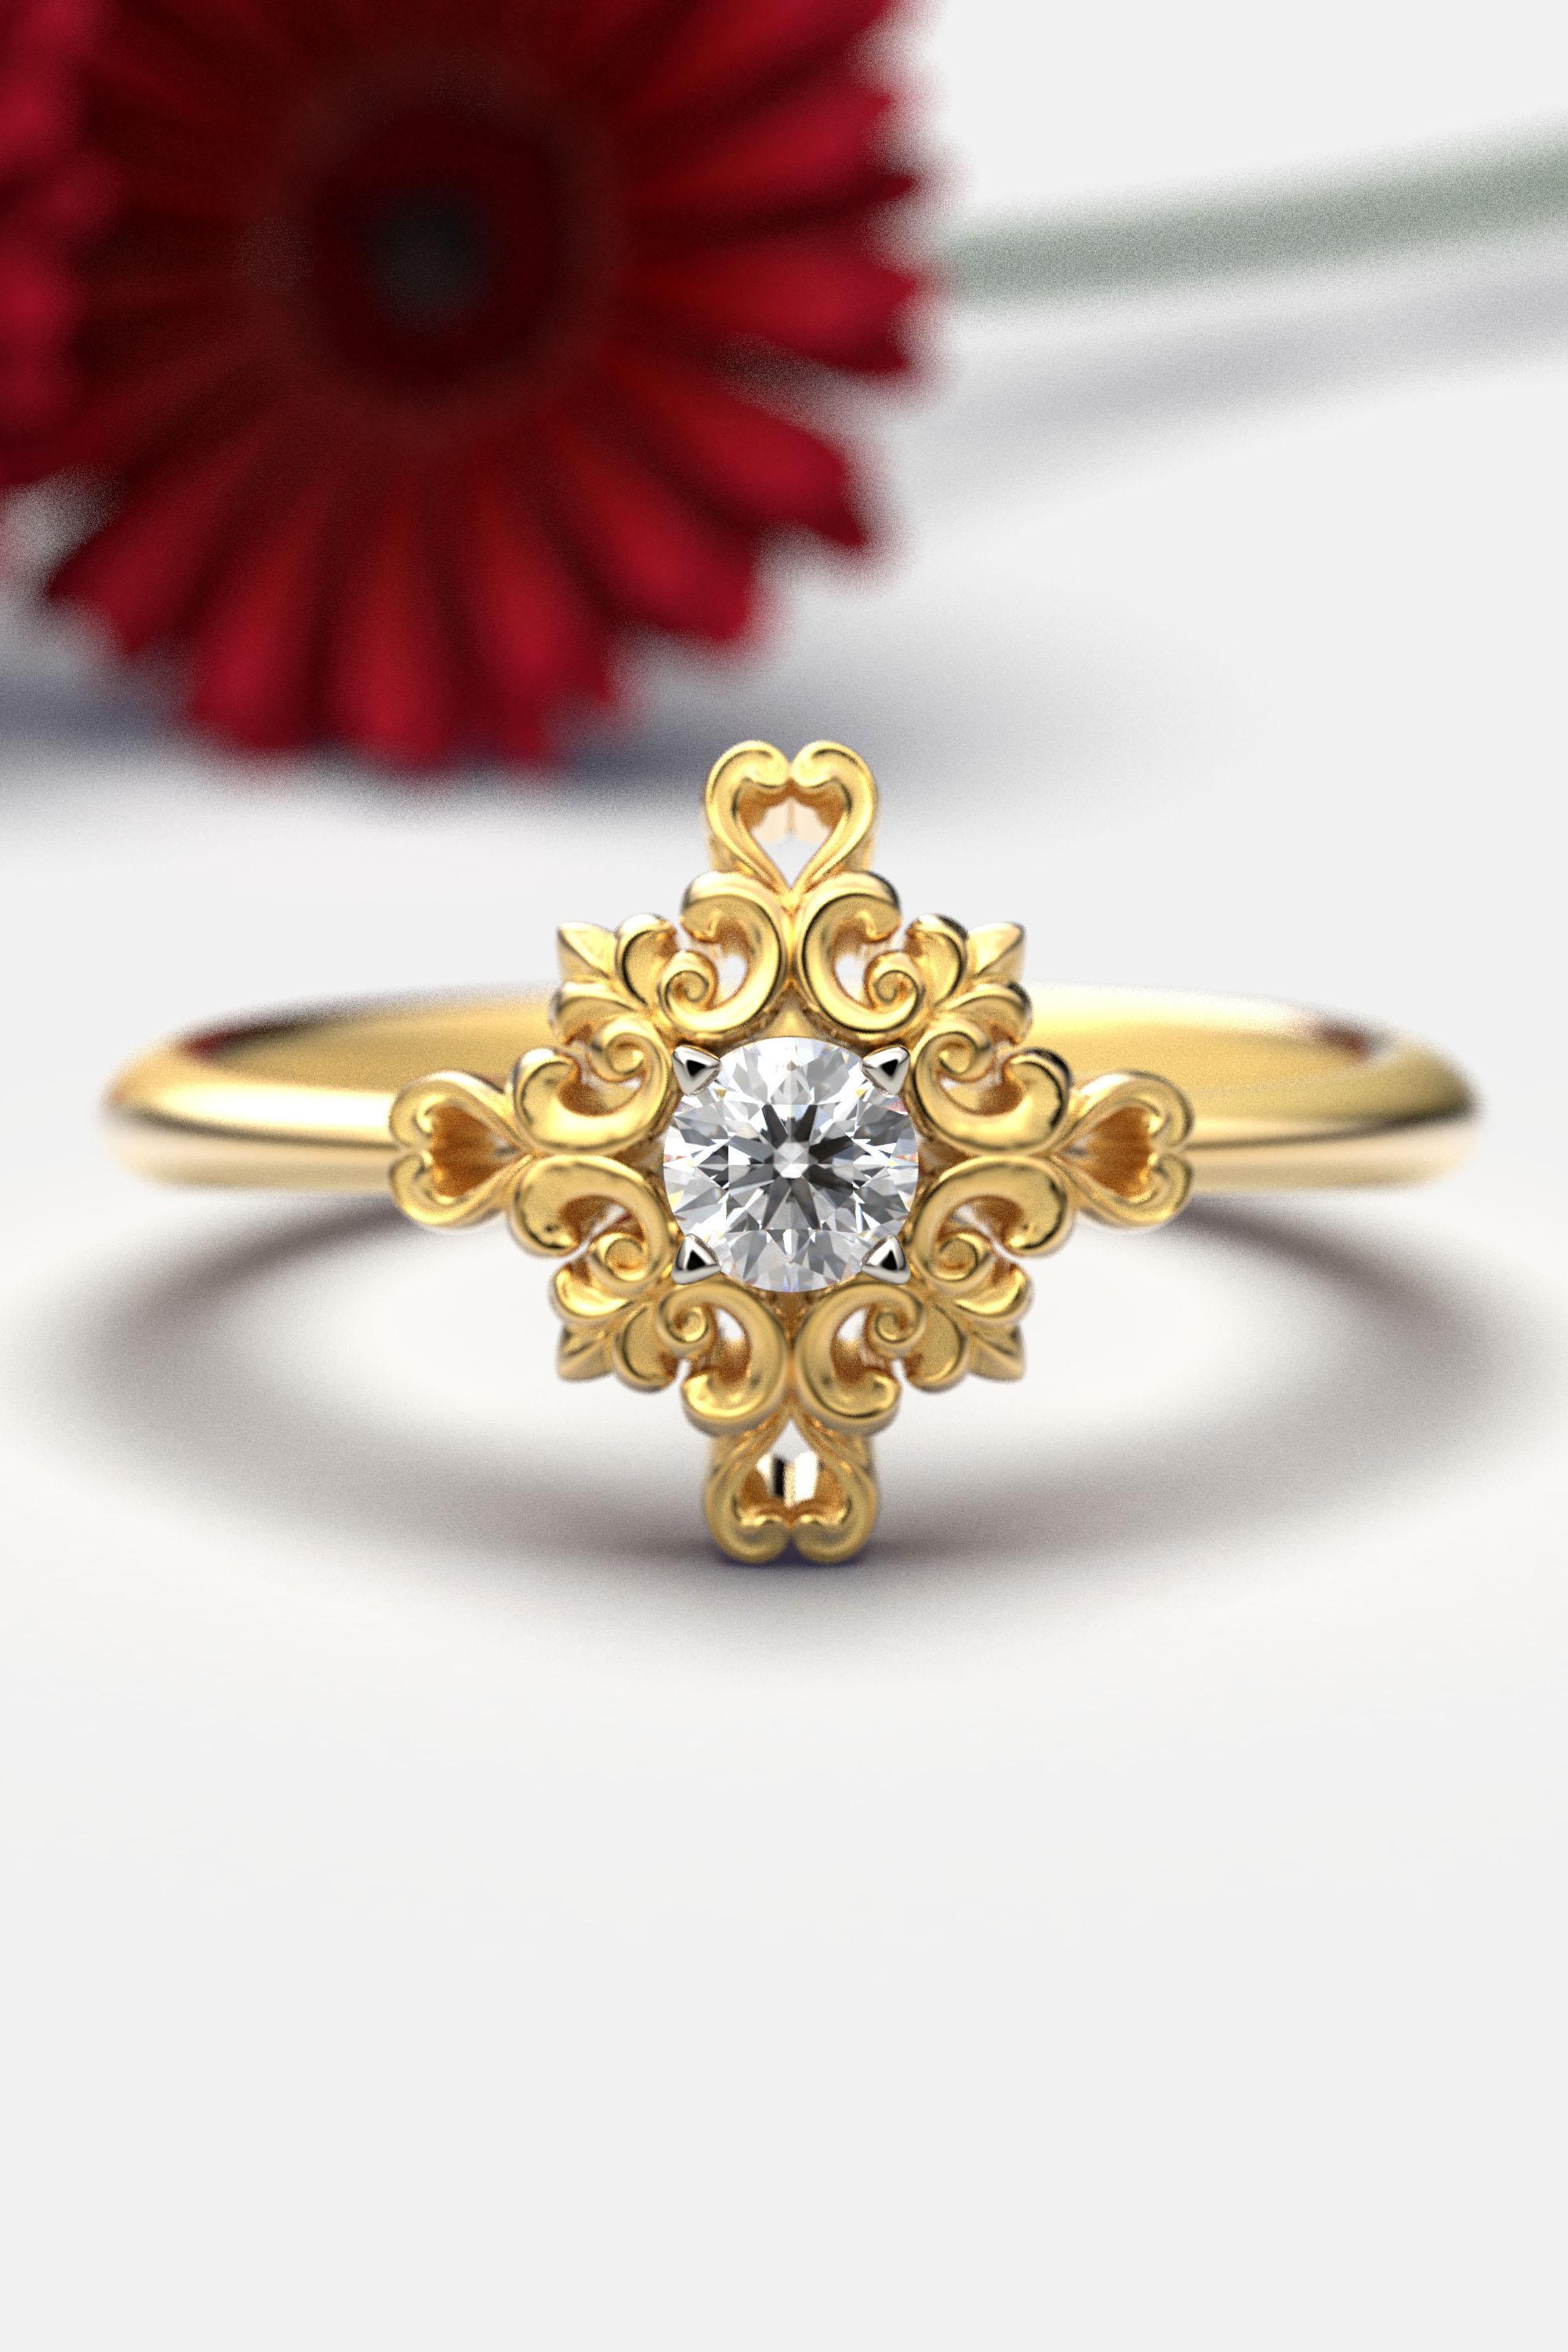 For Sale:  14k Gold Italian Diamond Engagement Ring with Baroque Setting 2